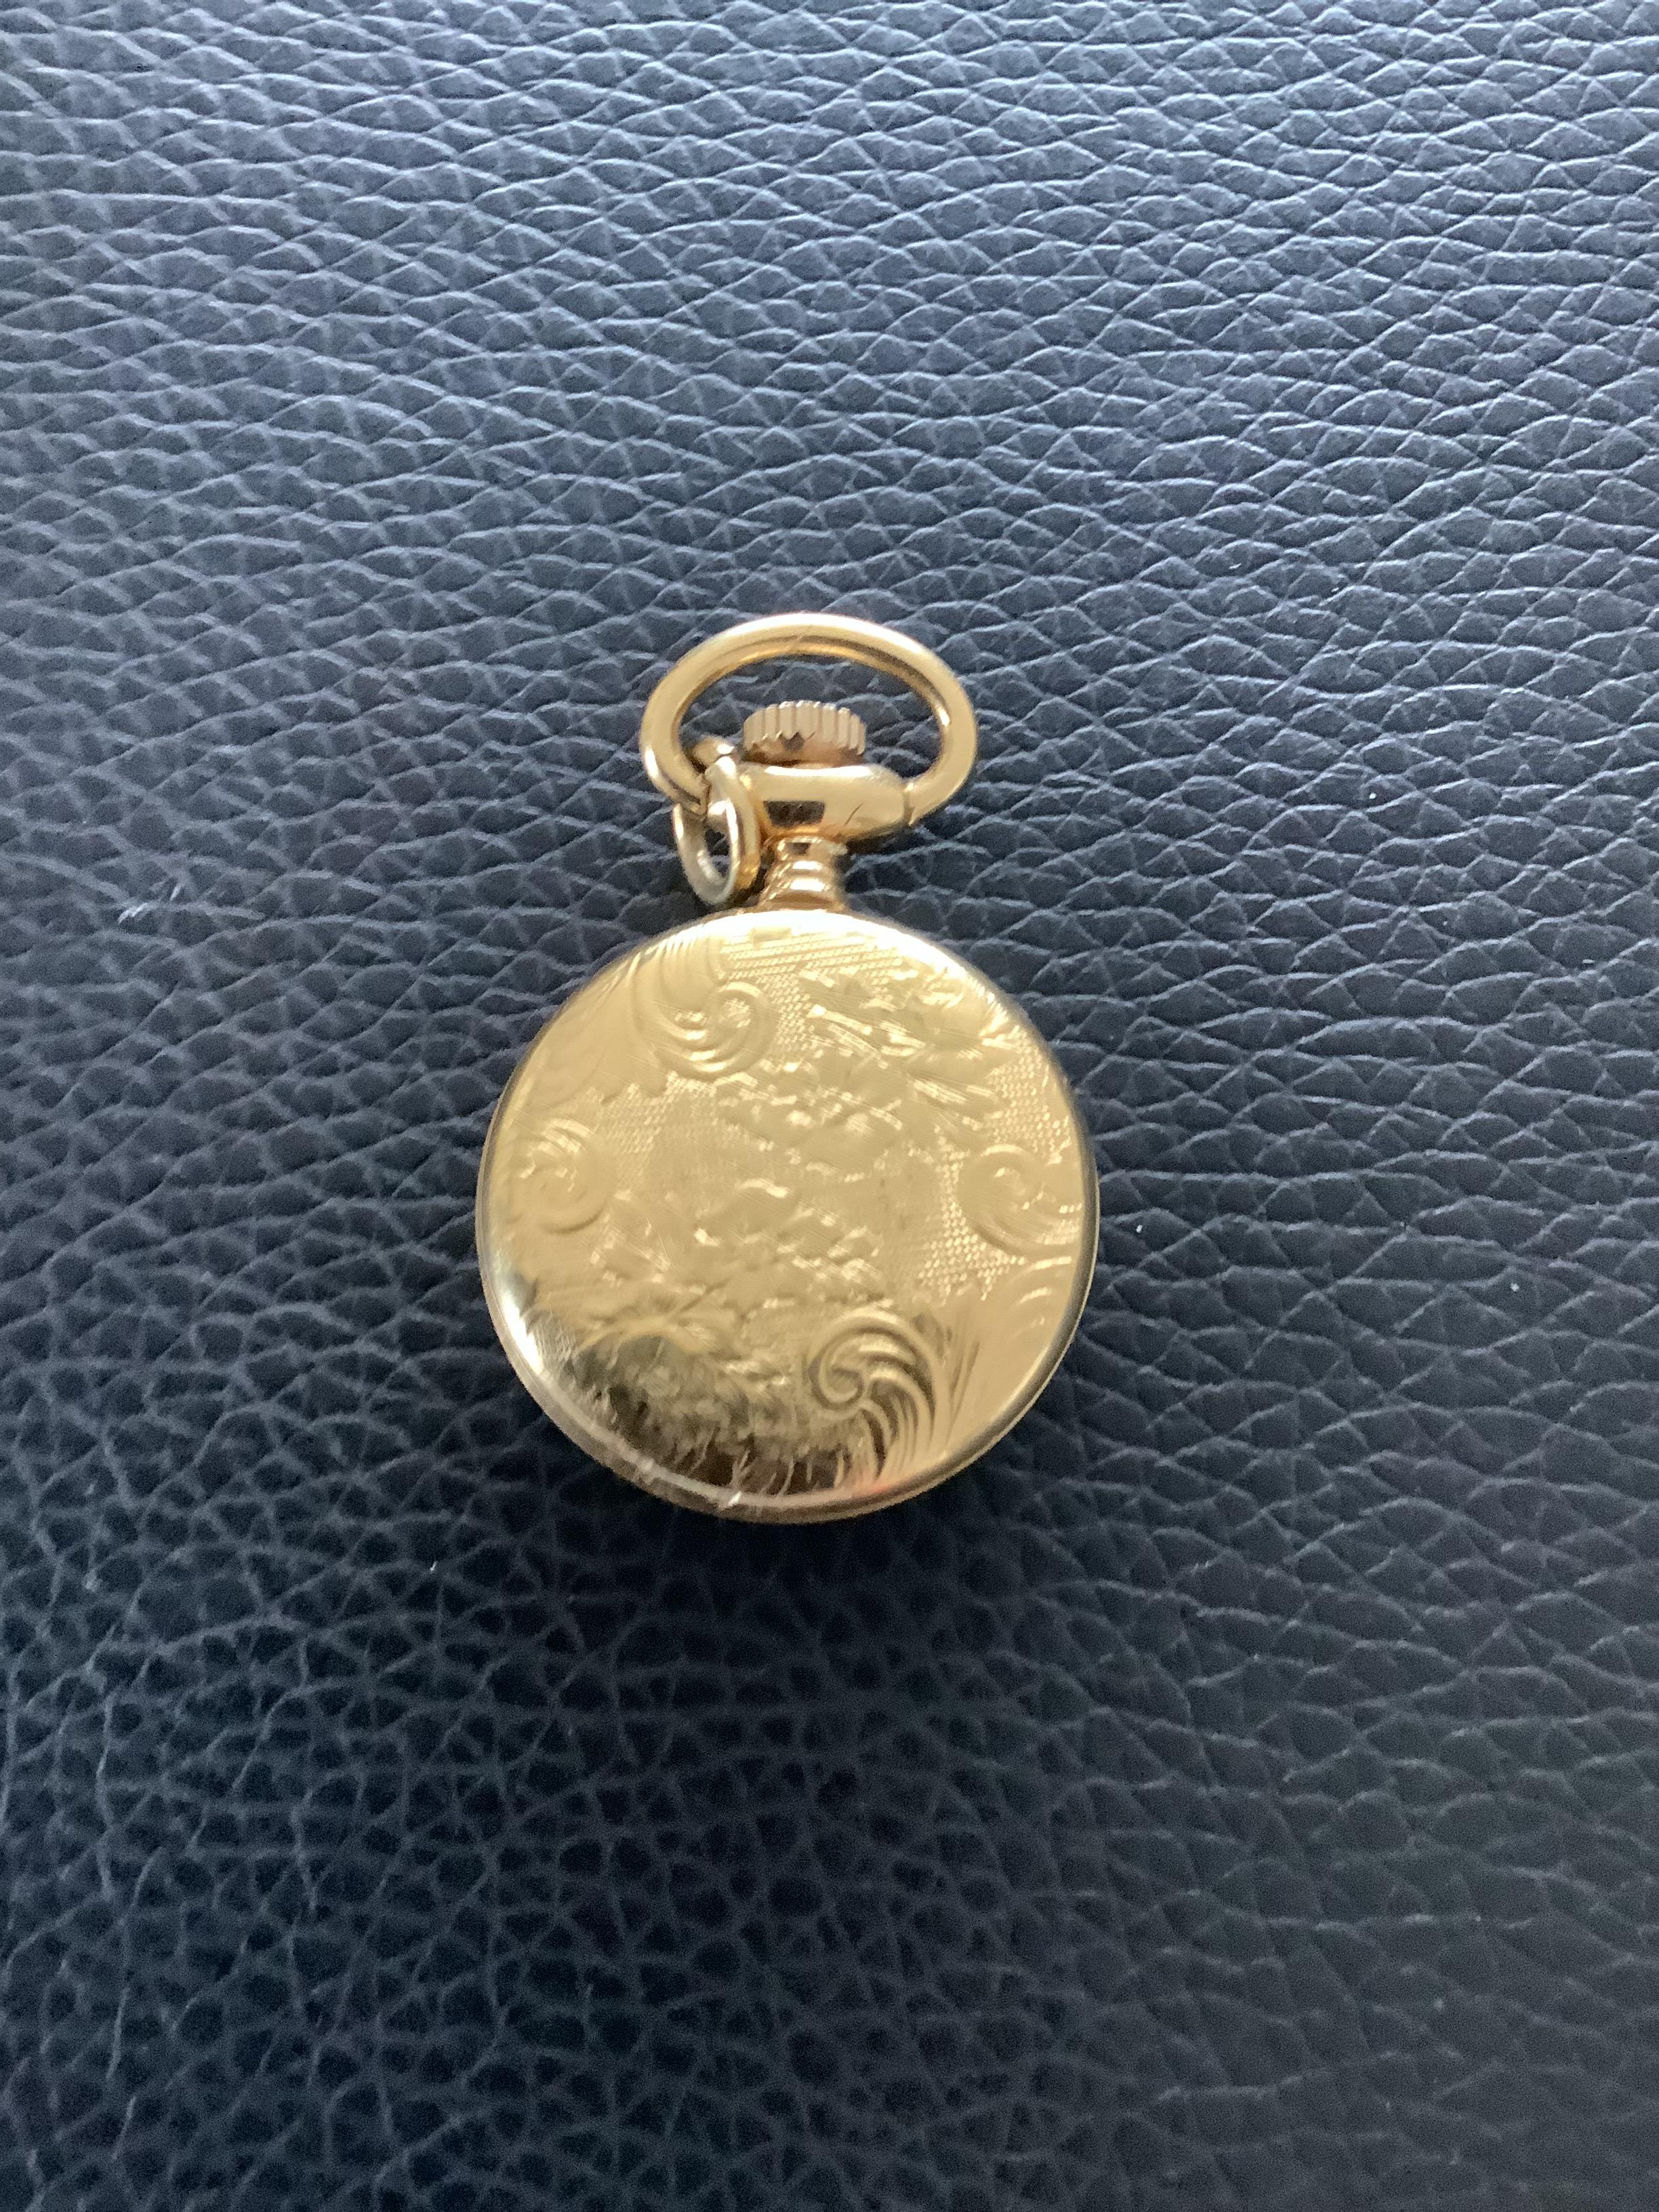 Gorgeous Gold Plated F Hinds Quartz Fob Watch (GS 182) Gorgeous little Gold Plated F Hinds - Image 2 of 5